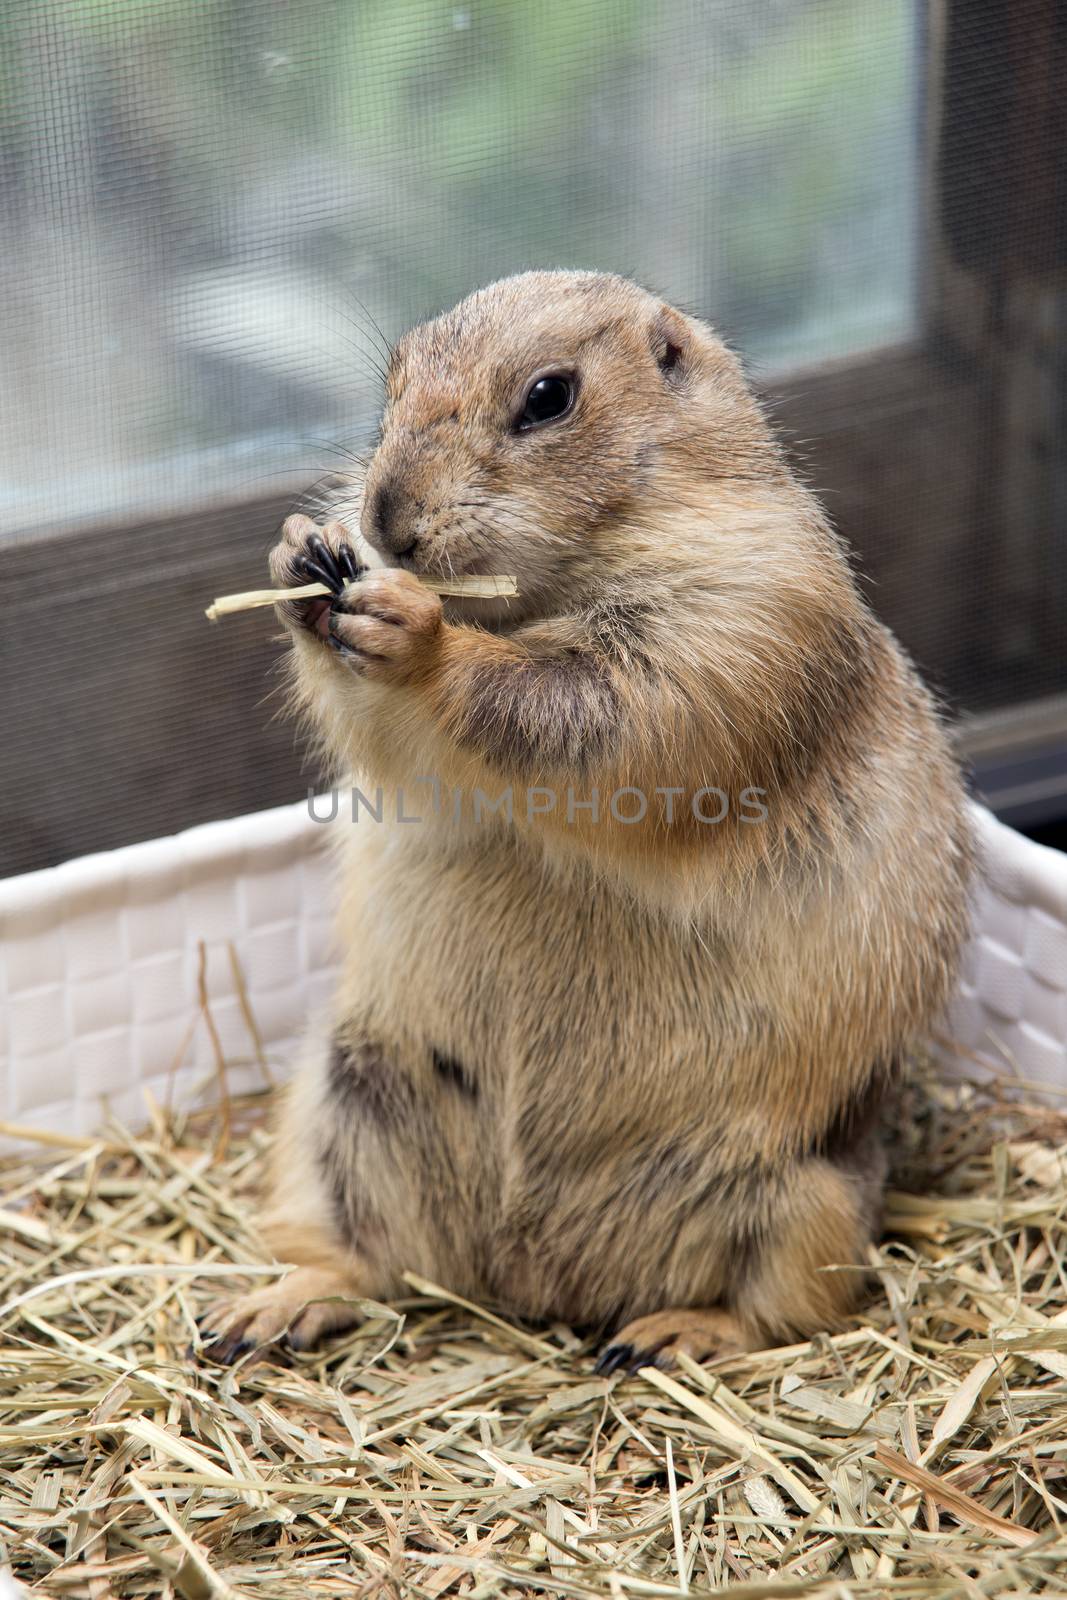 Little prairie dog sitting and eating grass in open cage.